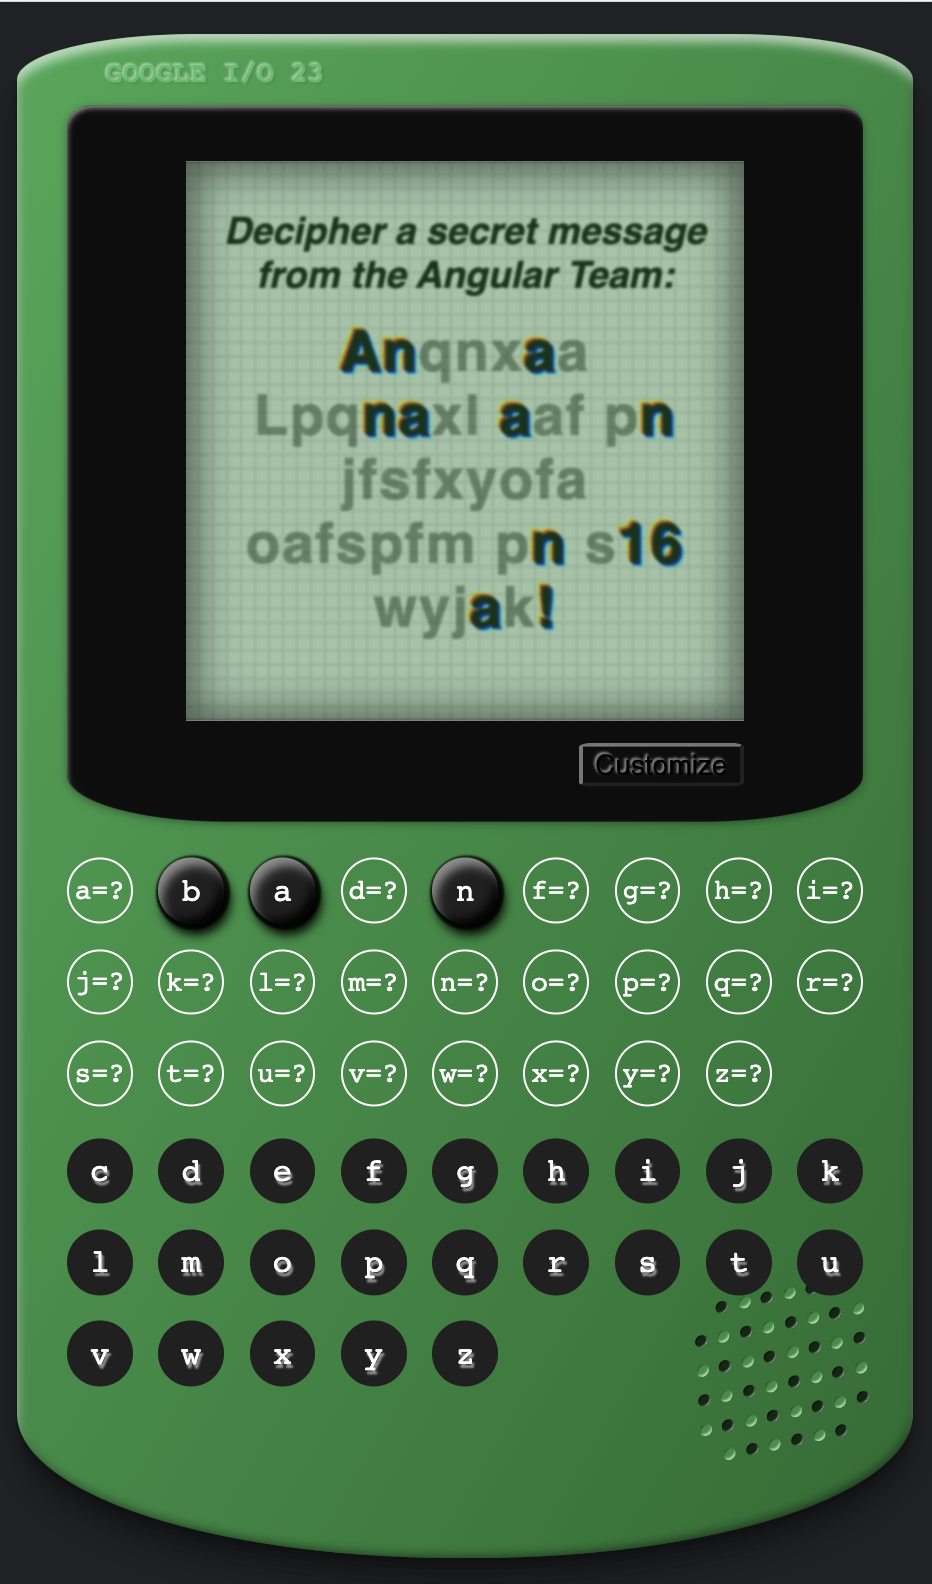 Angular Cypher game in the style of a vintage green gaming console, with a hidden message on the screen of 'Anqnxaa Lpcnaxl aaf pn jfafxyofa aofapfm pn a16 wyjak!'